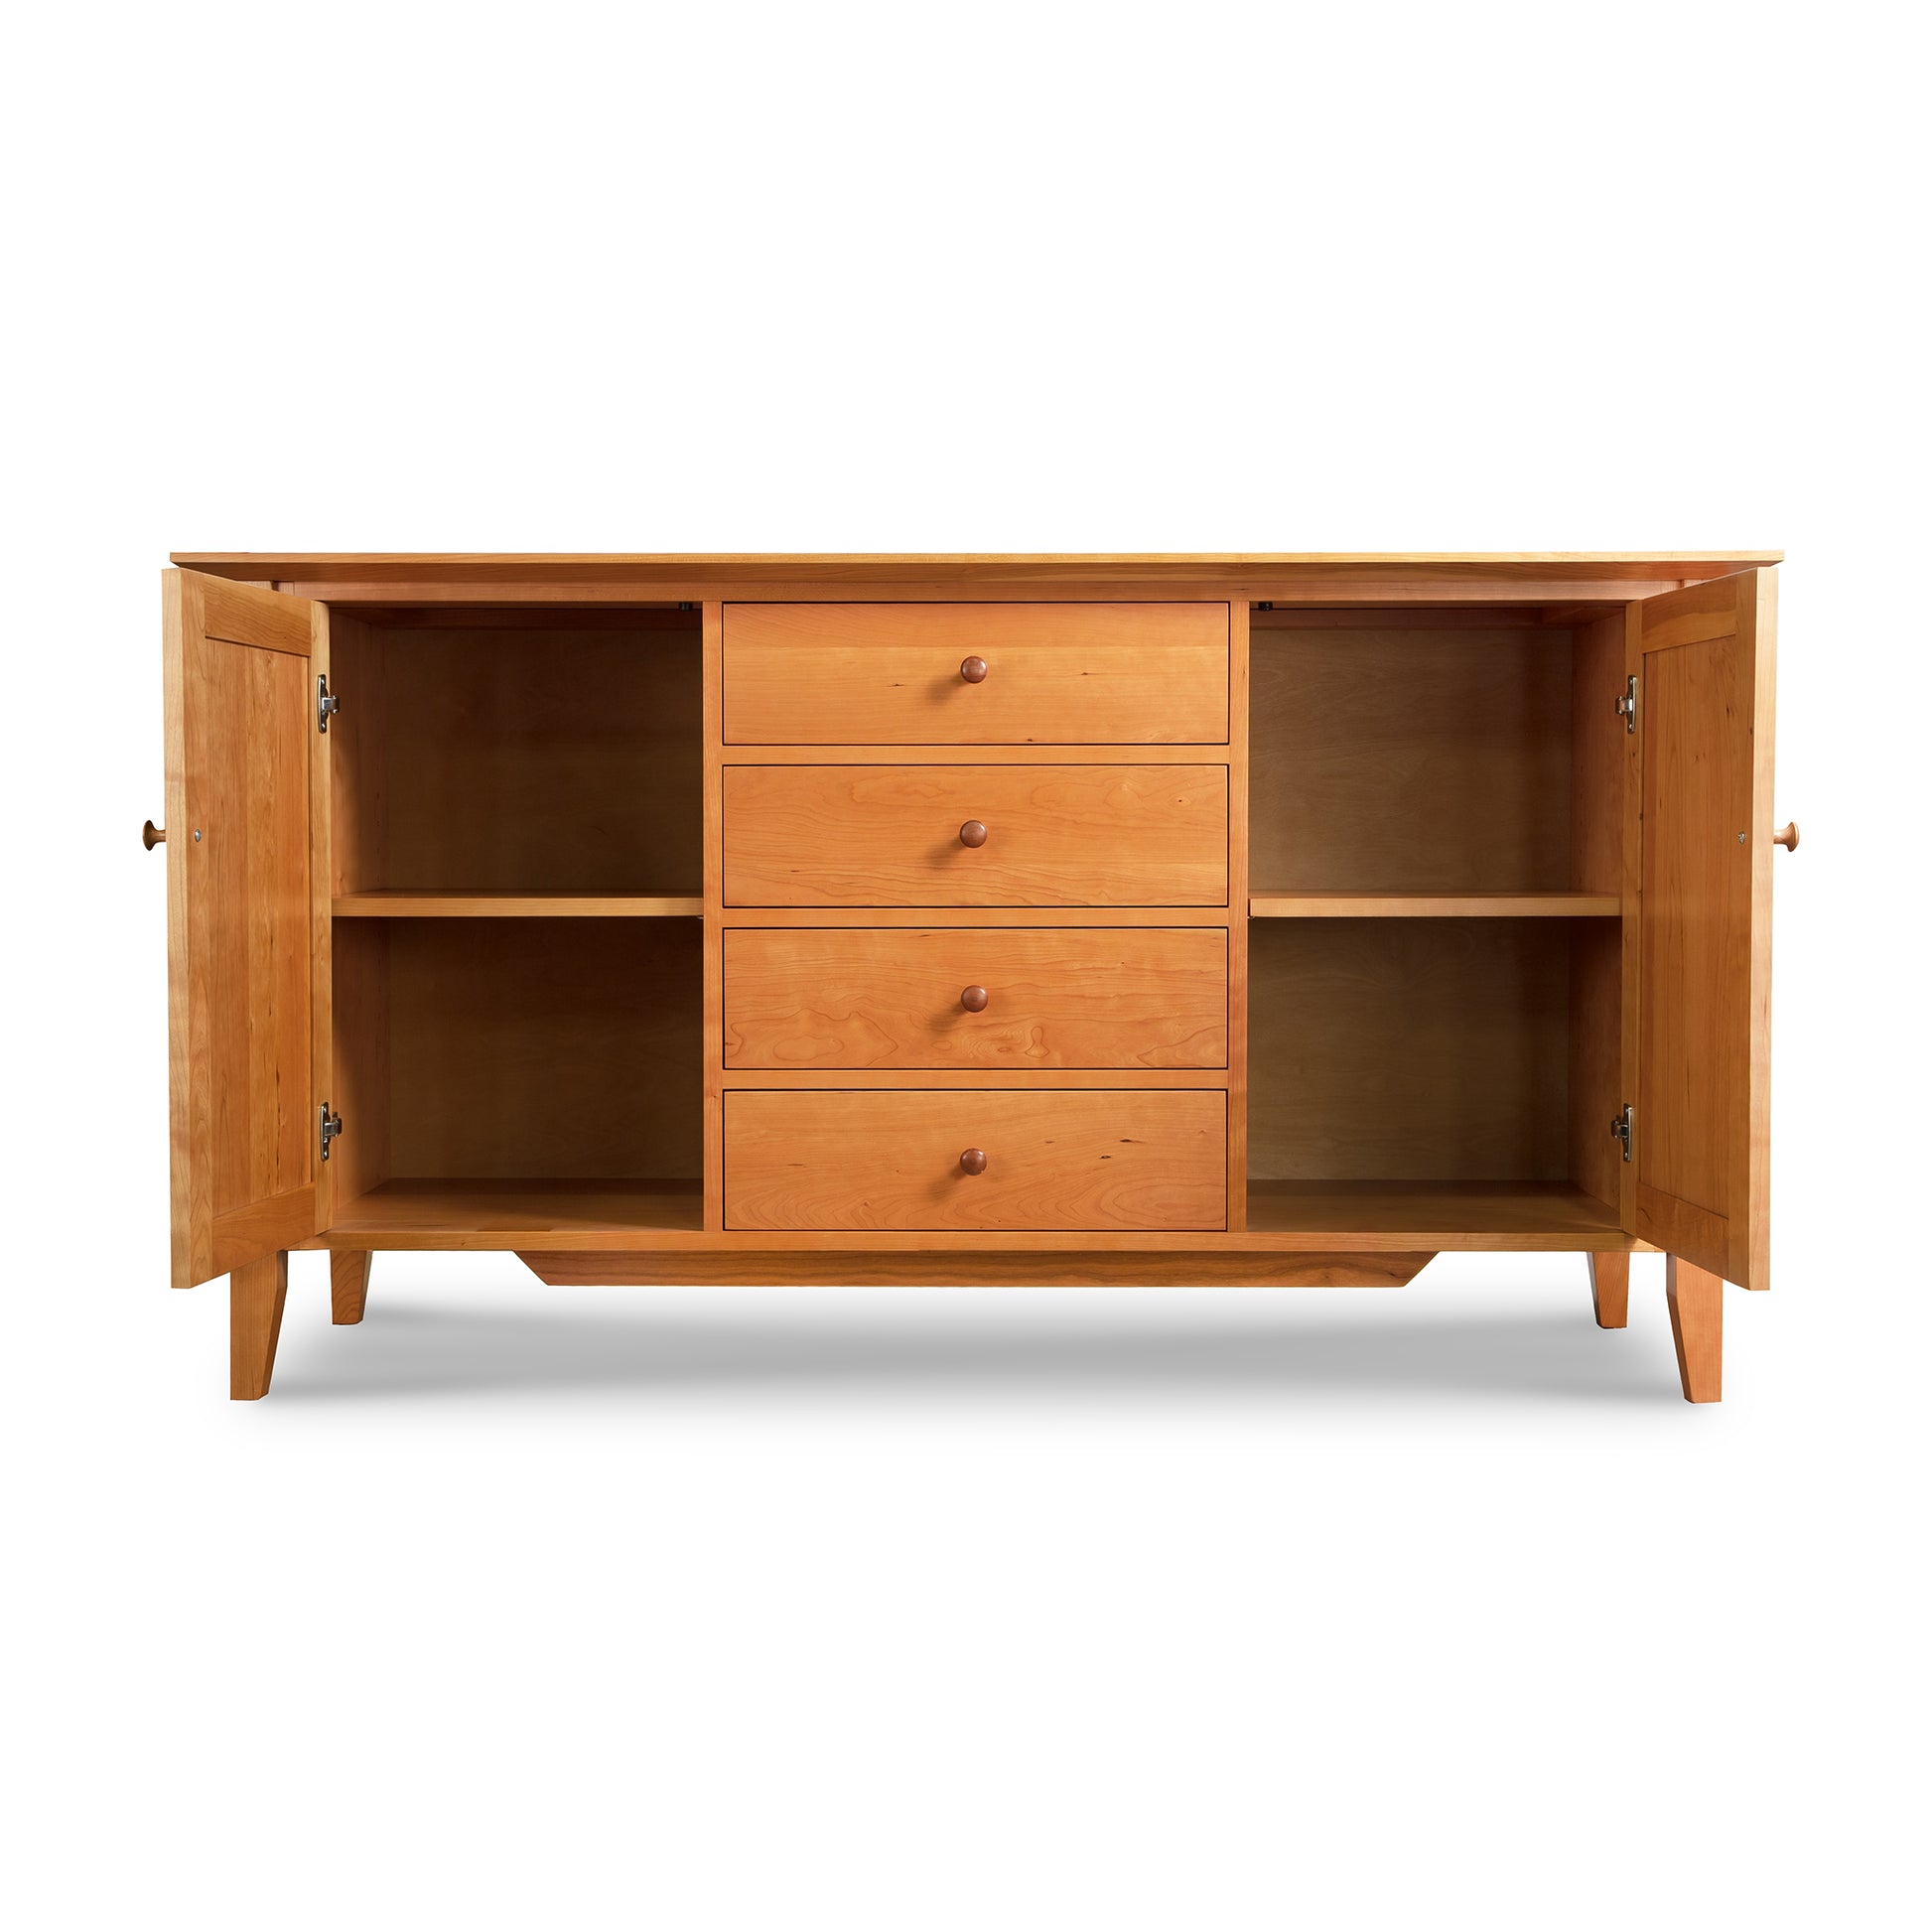 A handmade wooden sideboard with drawers, crafted with hardwoods for added durability and featuring options for customization - the Lyndon Furniture Classic Shaker Large Buffet.